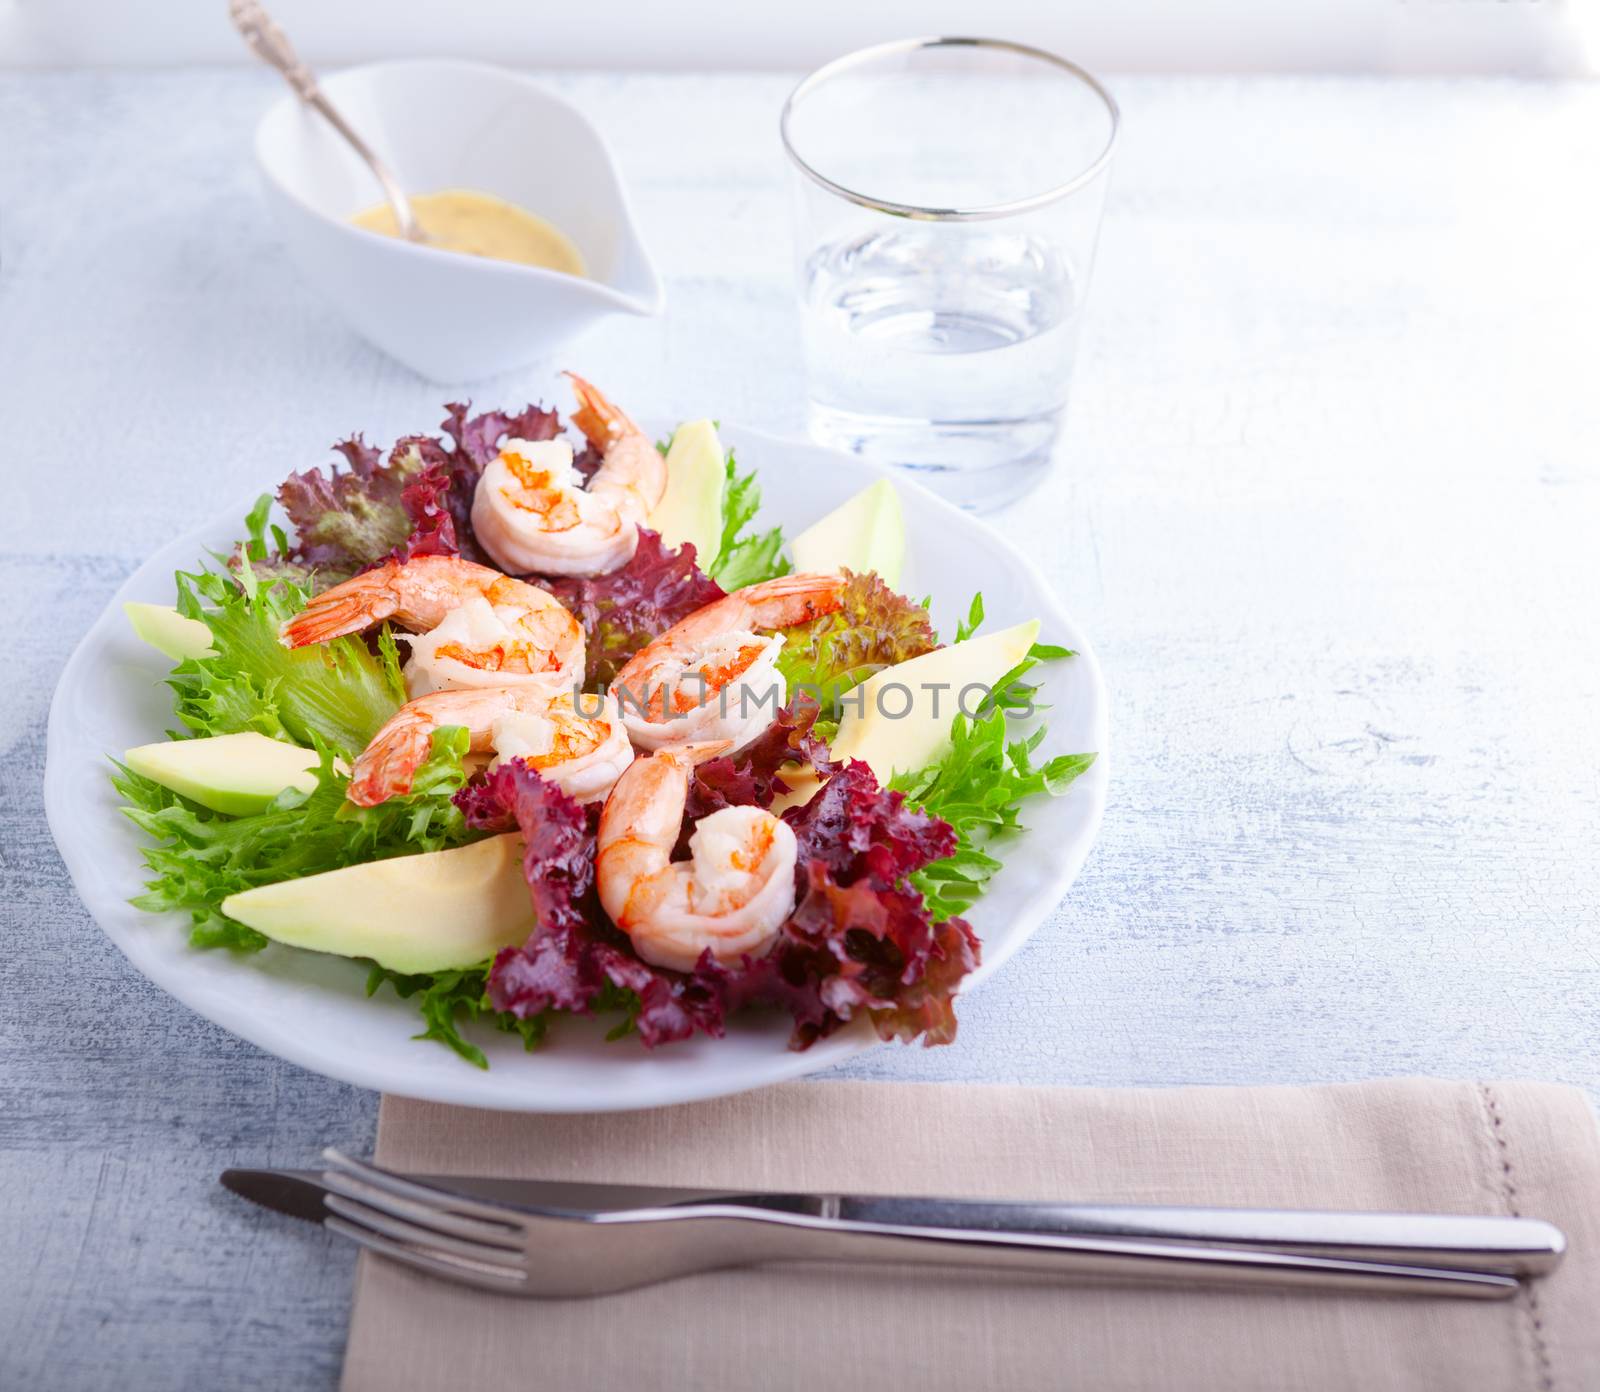 Avocado shrimp salad with mustard sauce on the table.